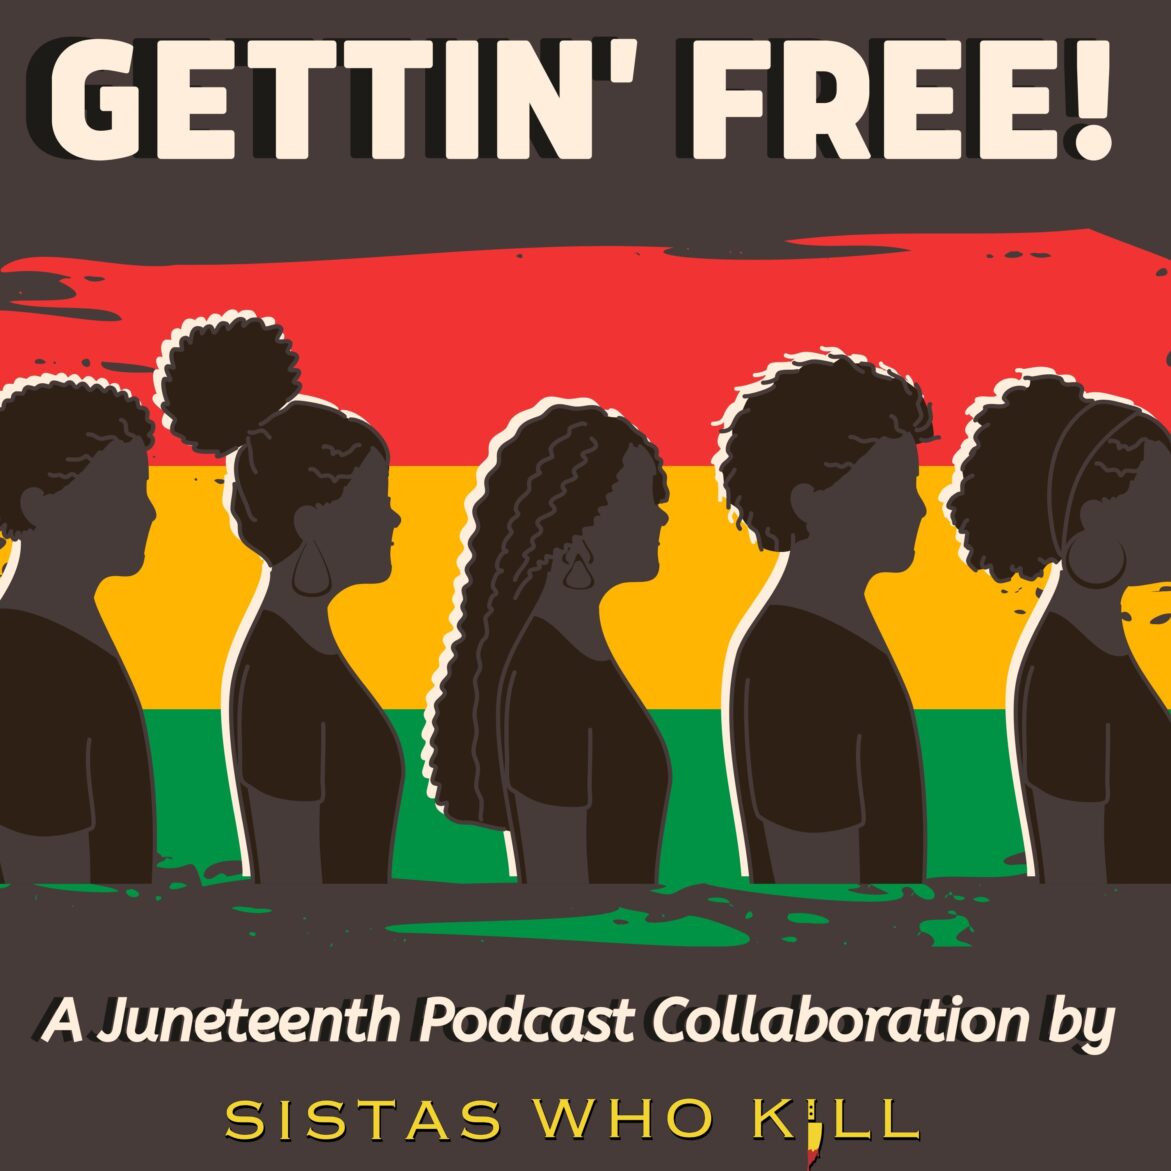 Black Podcasting - [BONUS EP] Gettin’ Free! : A Juneteenth Collaboration brought to you by Sistas Who Kill: A True Crime Podcast.